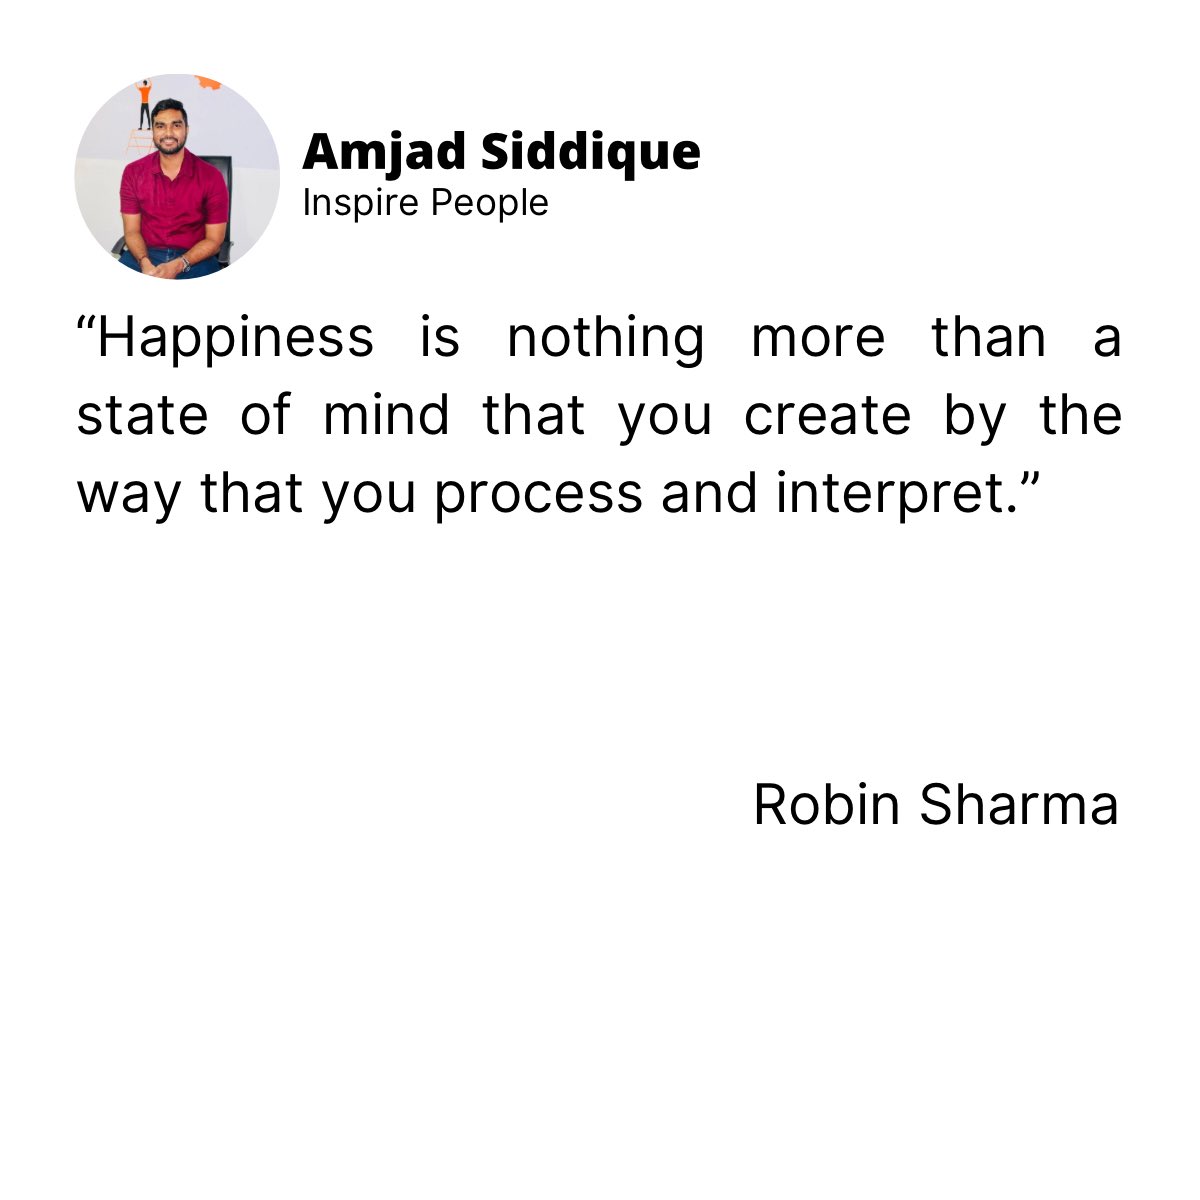 Learnings From My Reading Journey 📖               

What do you think? 🤔 please share your thoughts 💭, Thank you!

The Secret Letters of the Monk Who Sold His Ferrari 
Robin Sharma

For more updates follow - @amjad__siddique  

#readingbooks #education #amjadsiddique